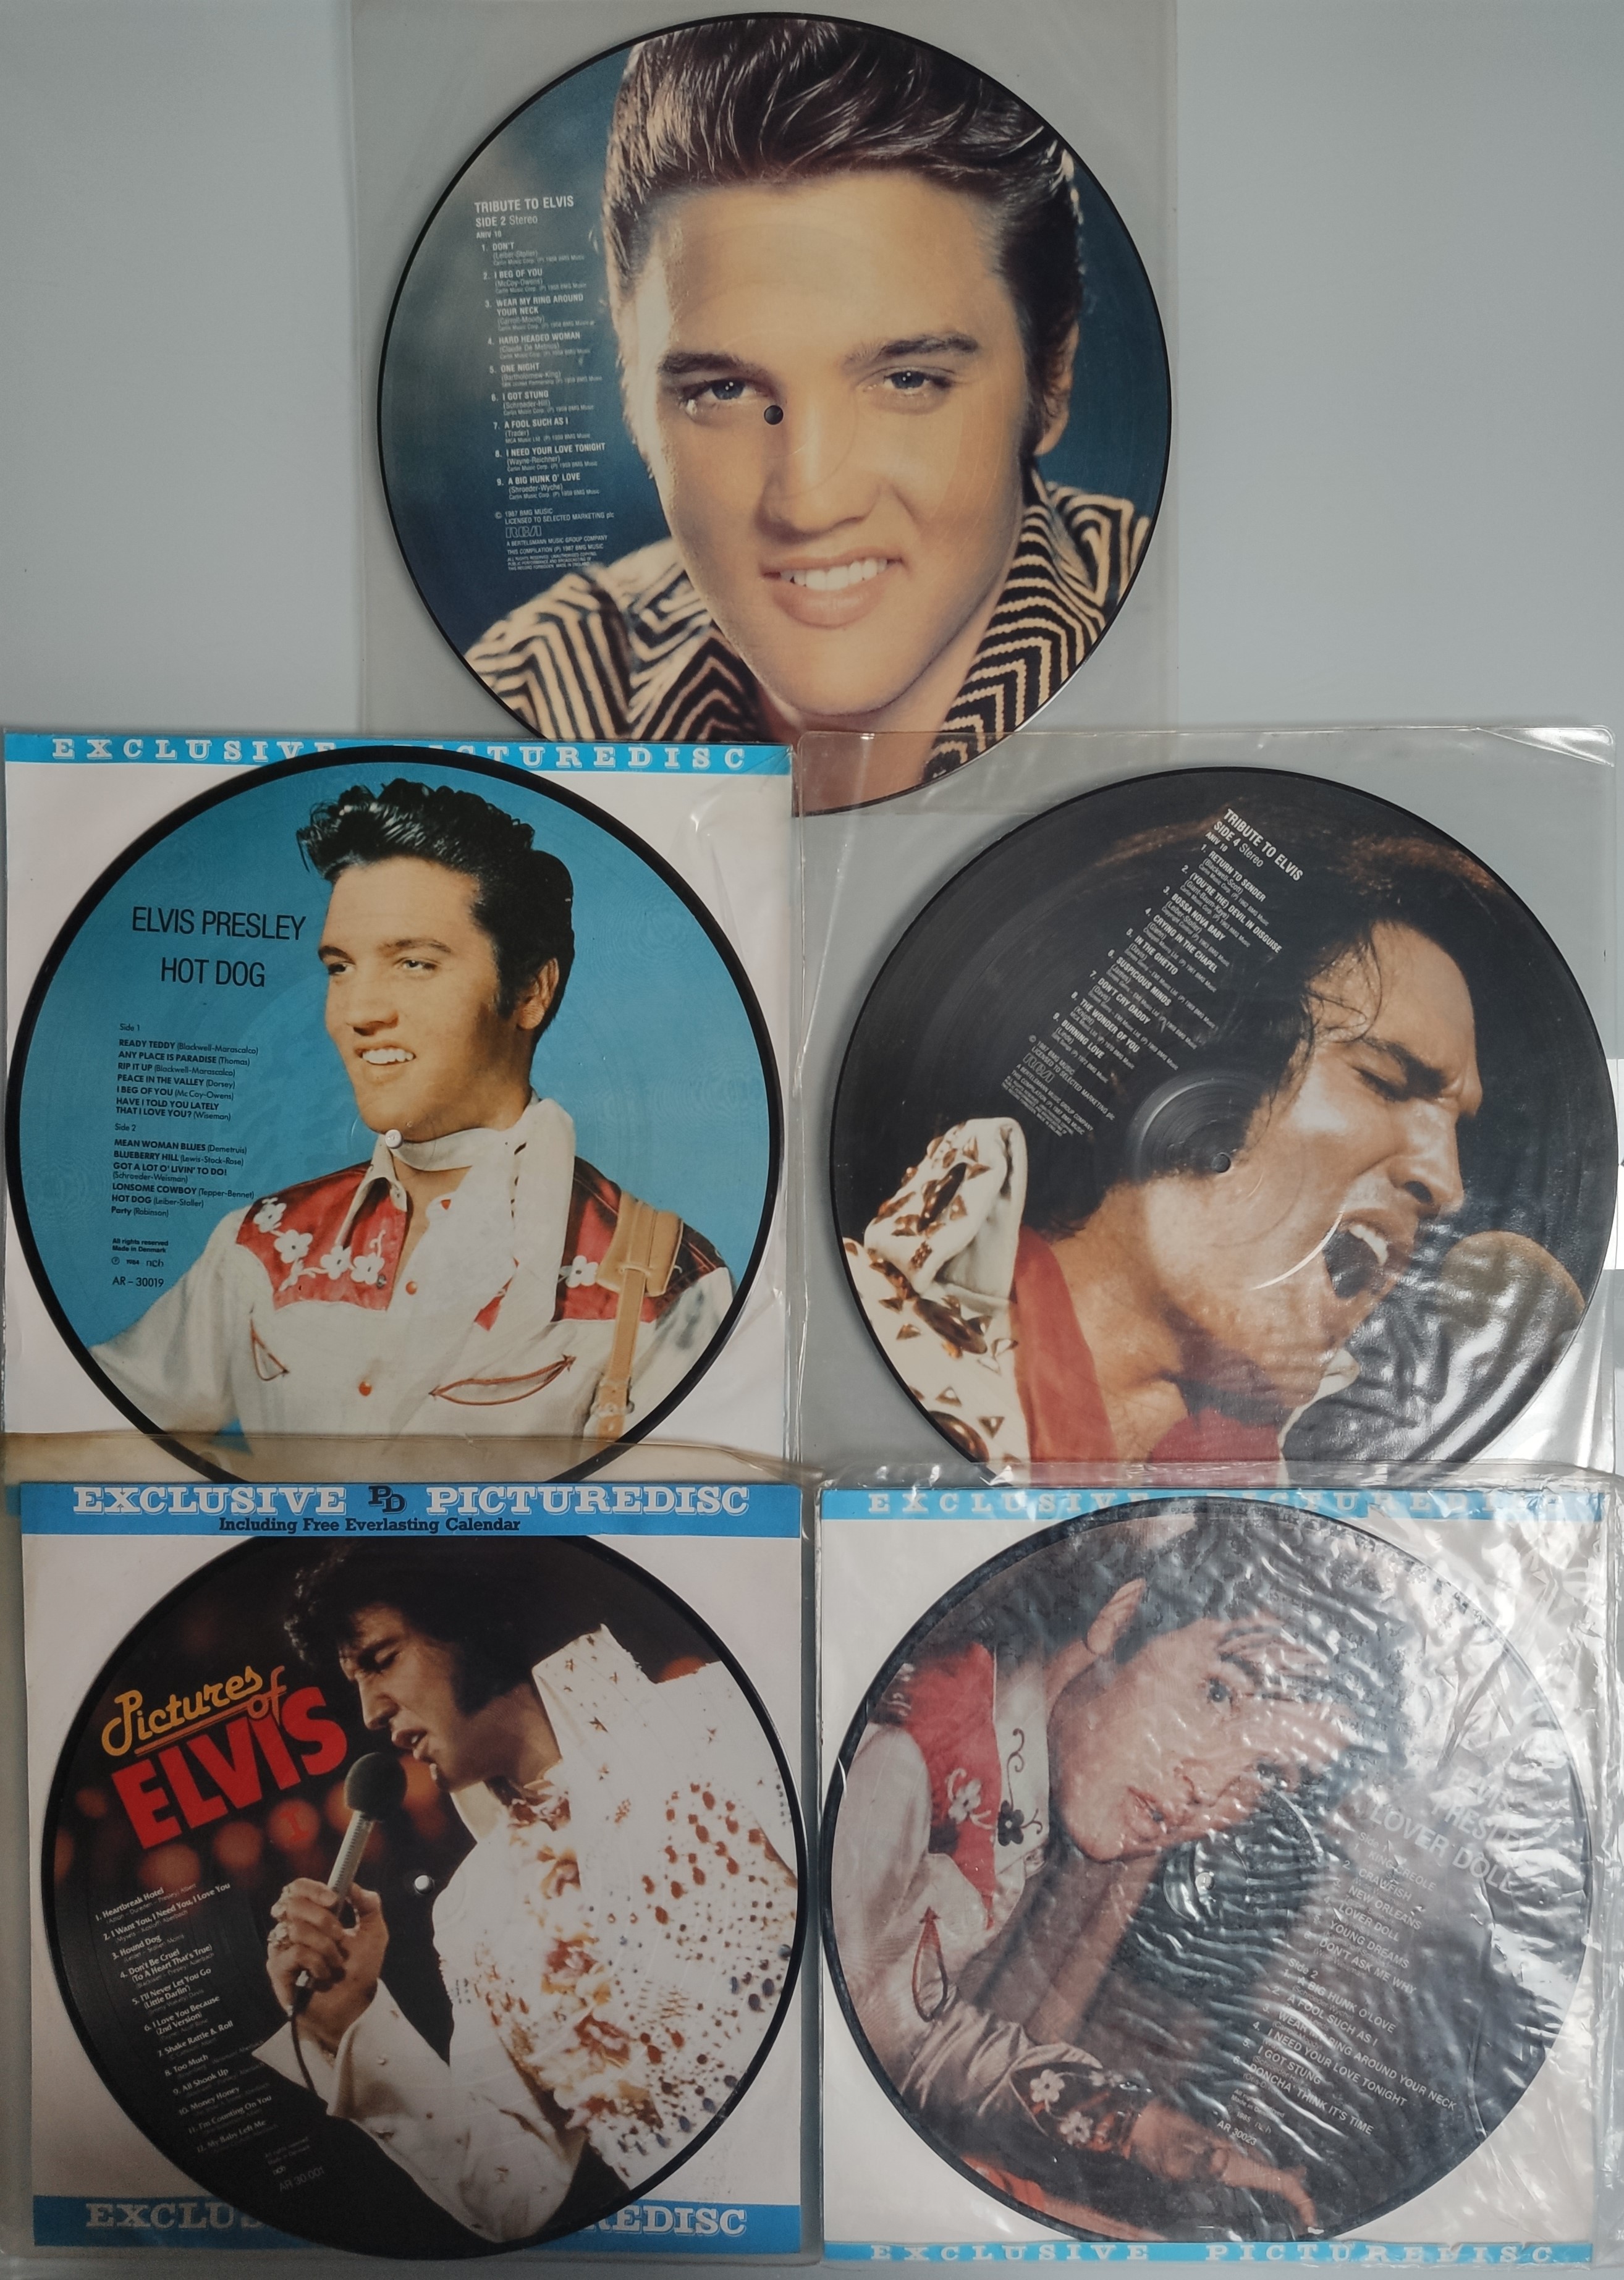 A Collection of 5 Elvis Presley Vinyl Record Picture Disks. Very Good Condition.